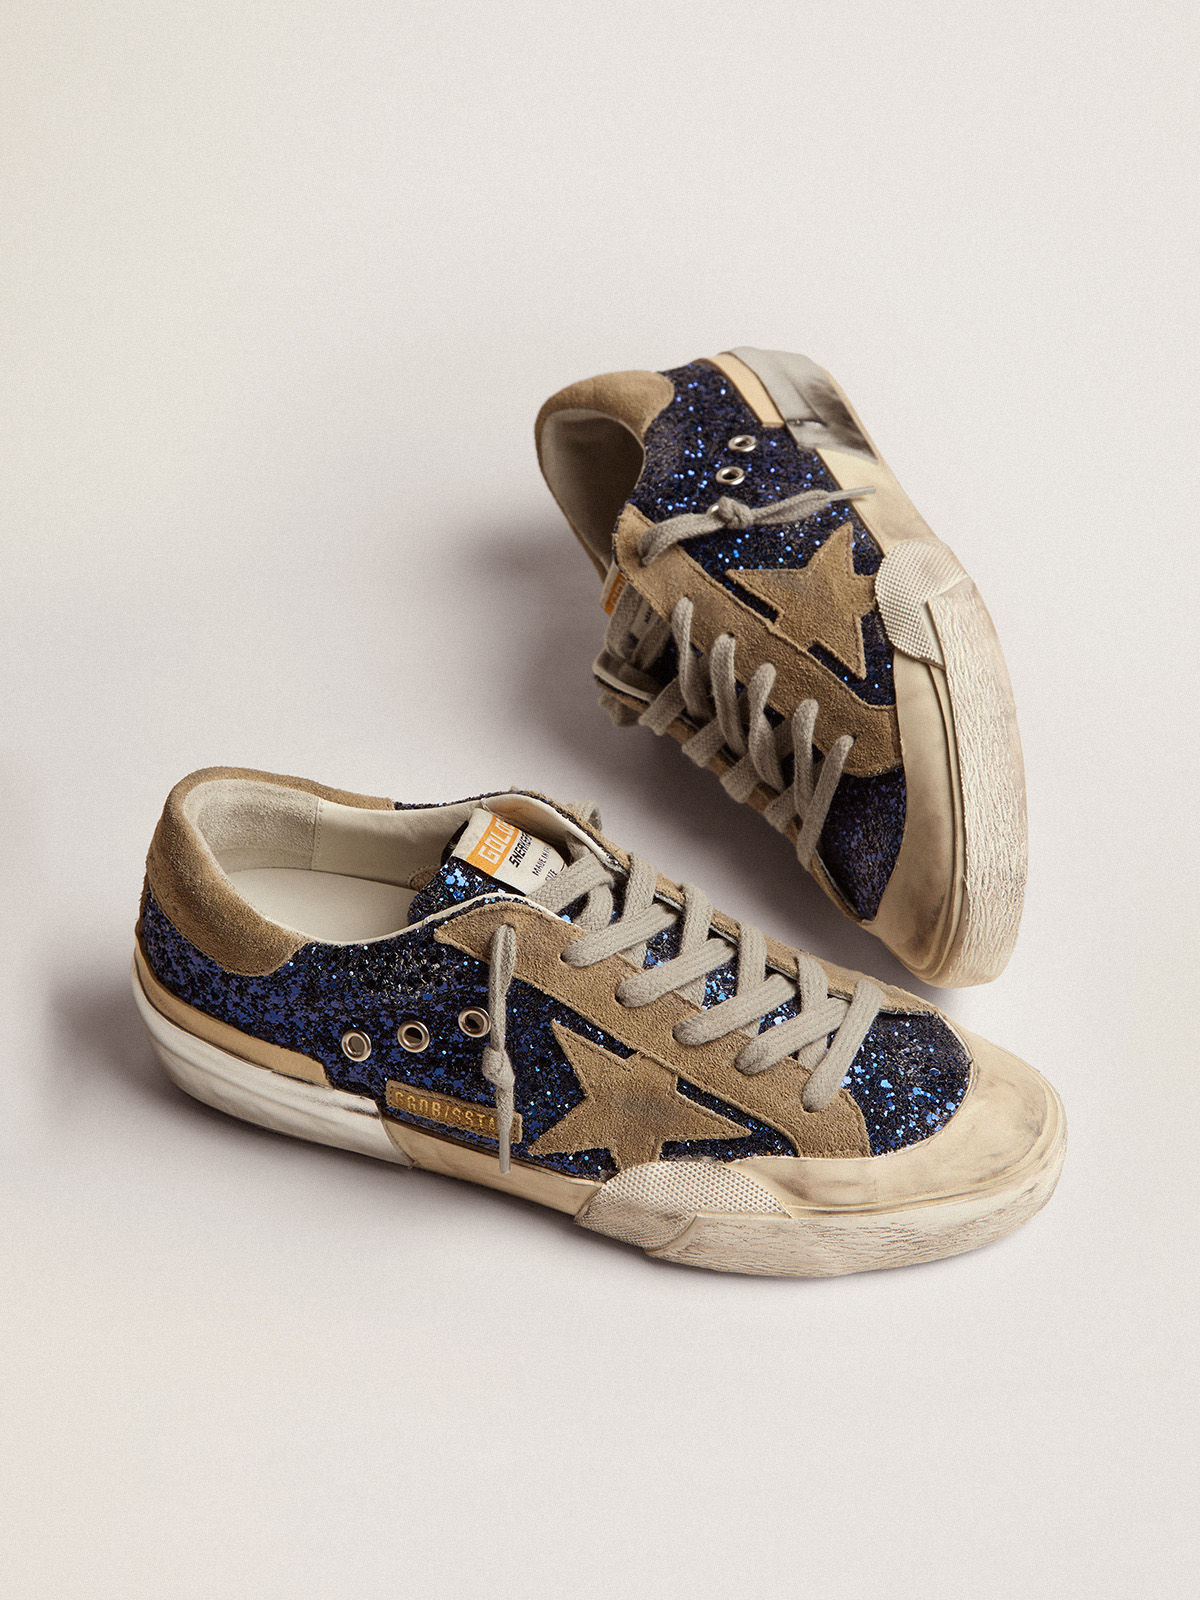 Women\'s Super-Star in blue glitter with dove gray suede star | Golden Goose